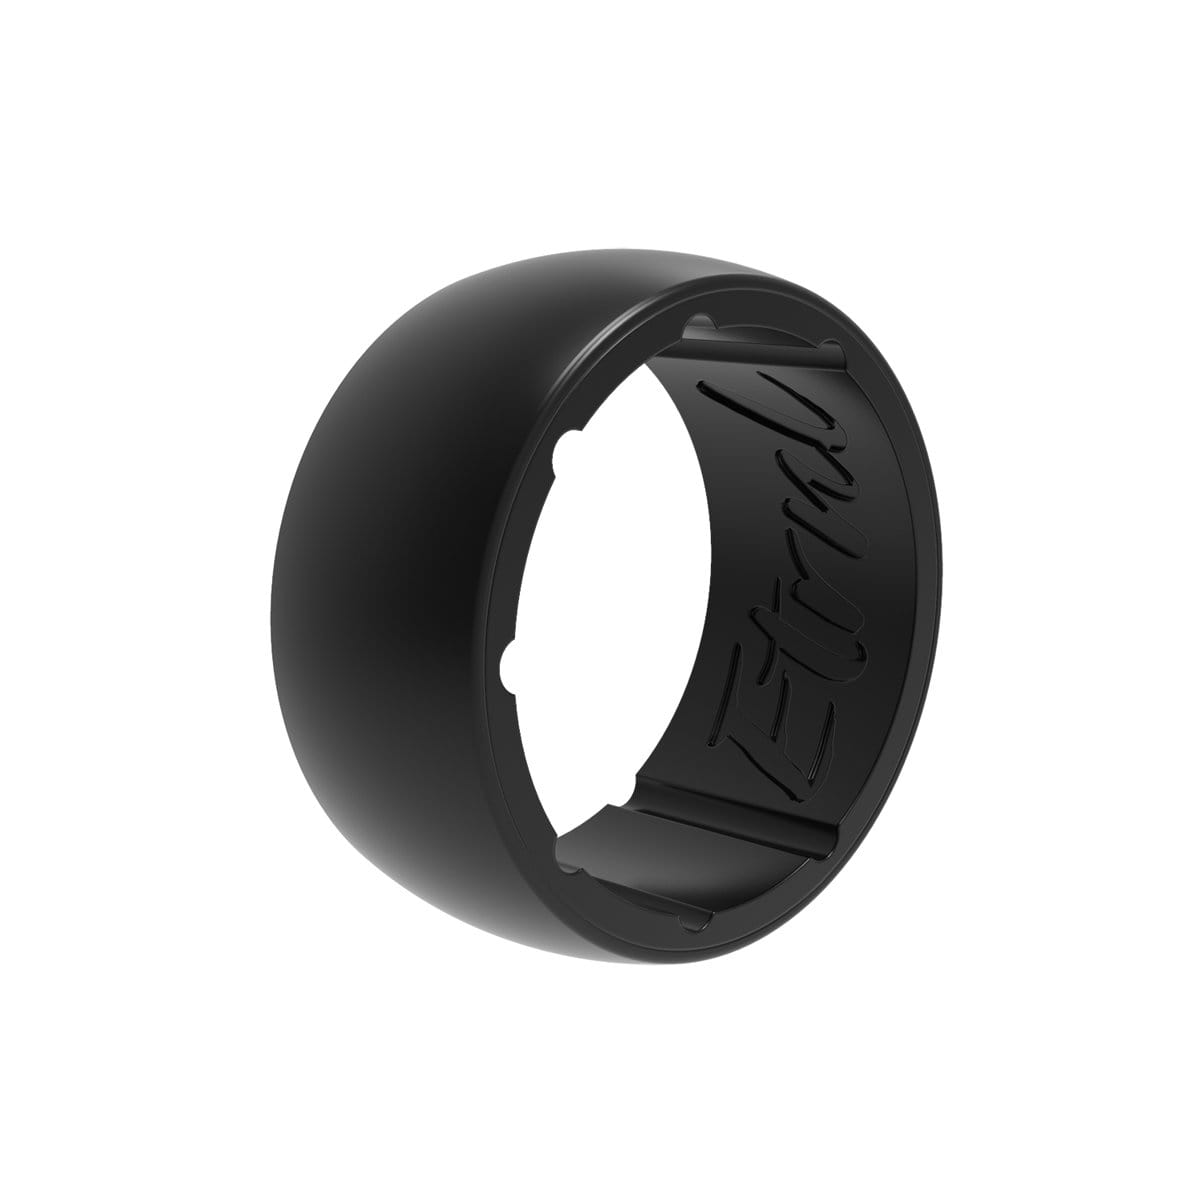 Cheap Silicone Rings For Women And Men | Best Silicone Wedding Bands –  CheapSiliconeRings